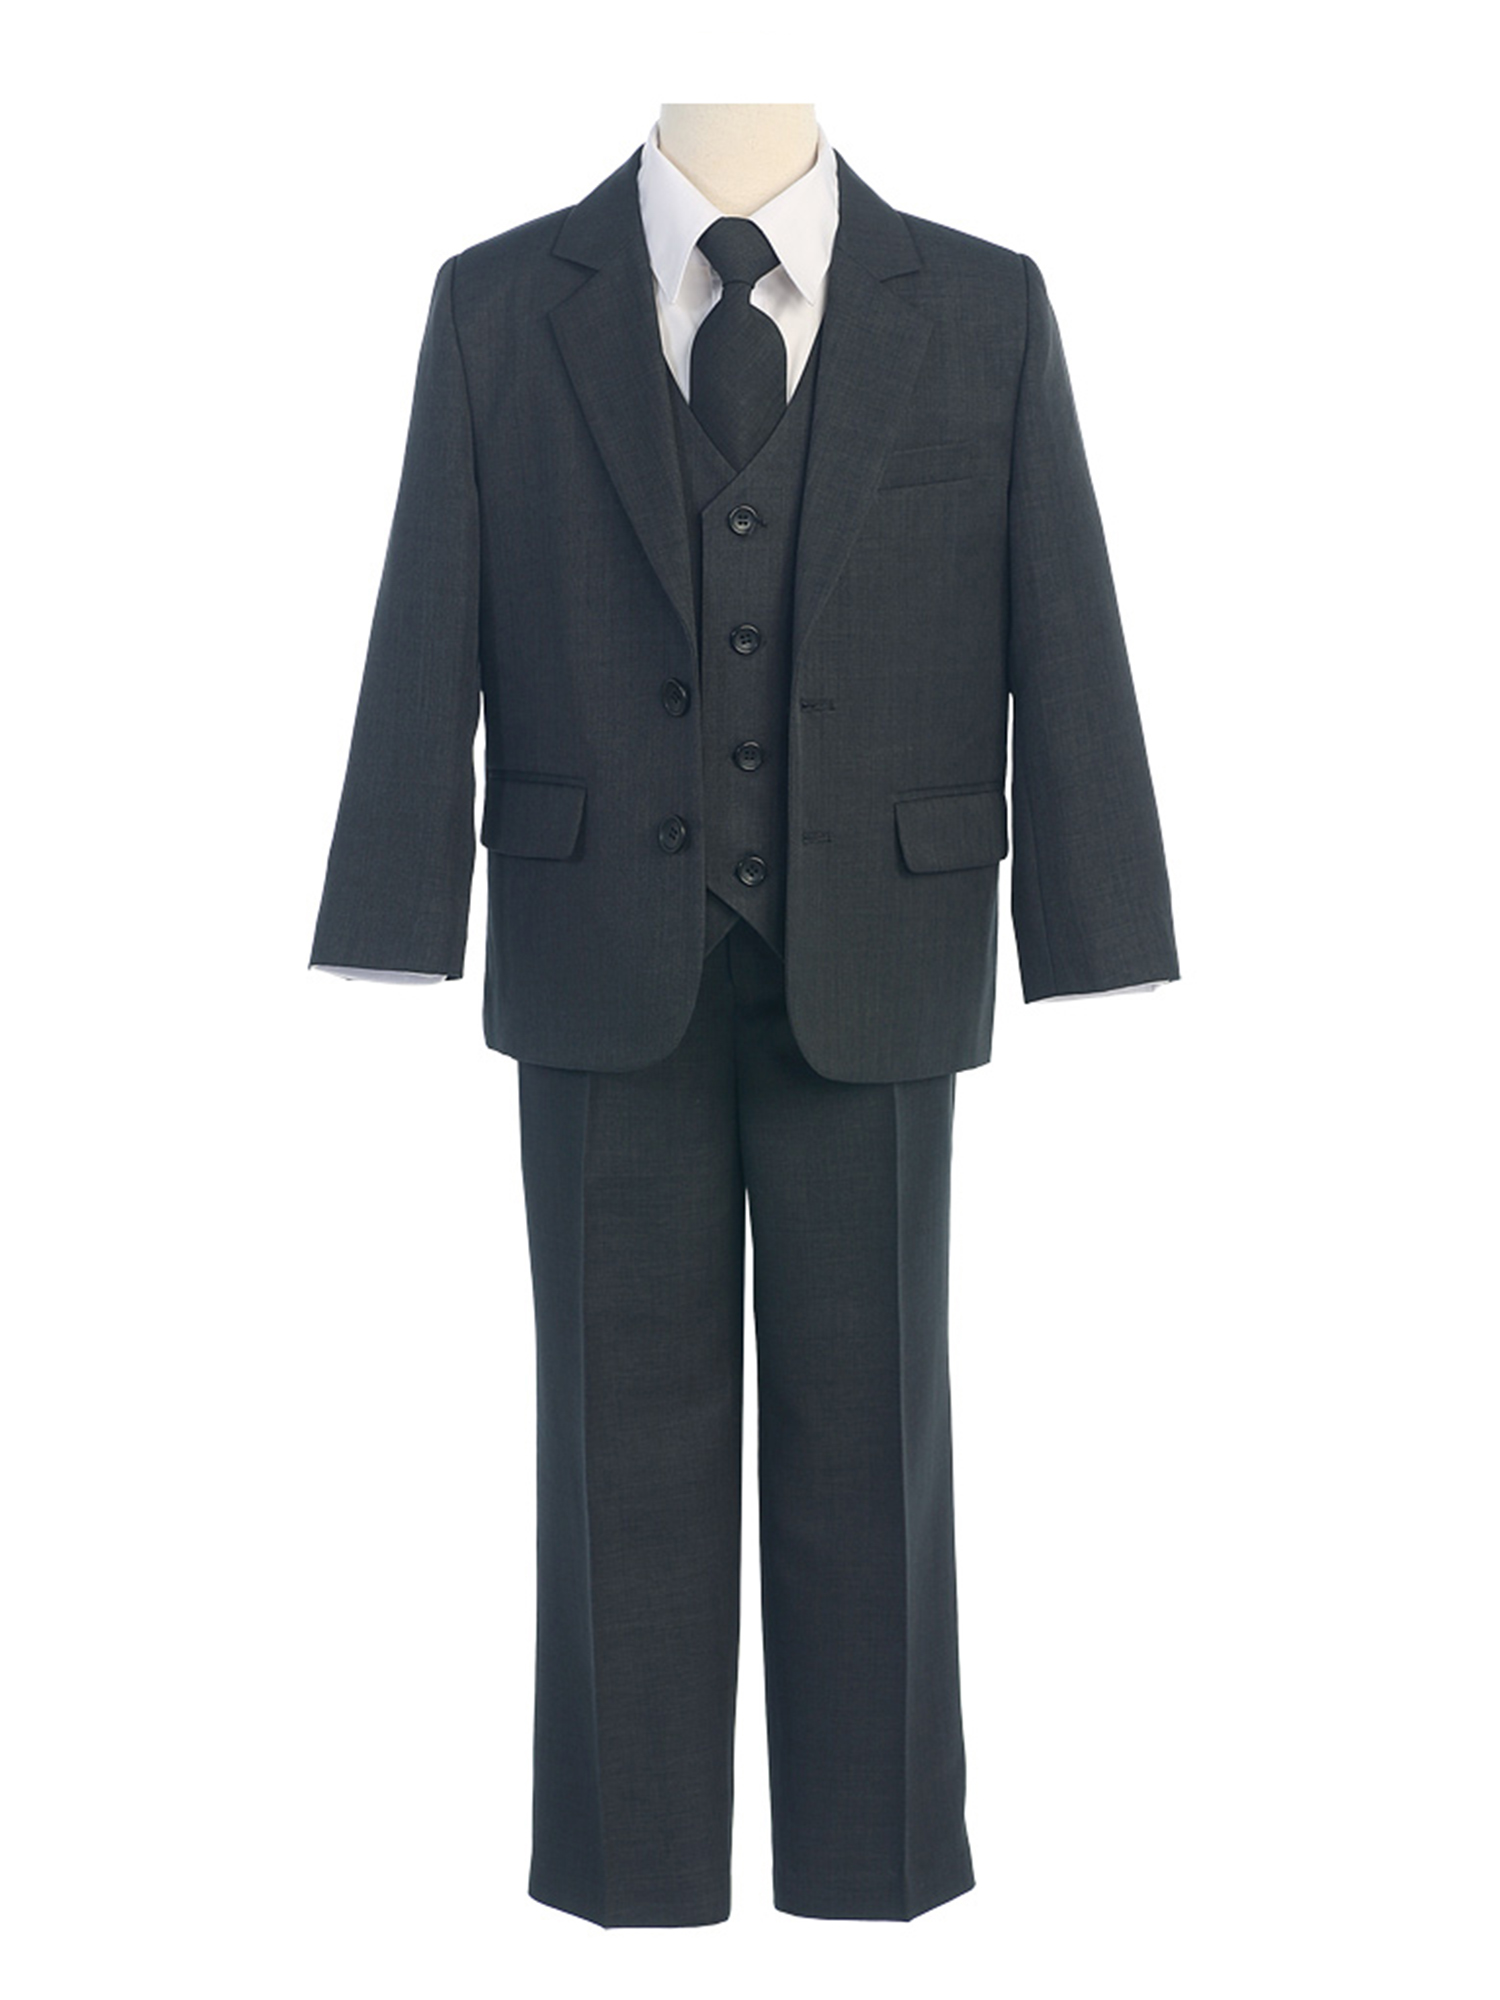 COLE Boys Suit with Shirt and Vest (5-Piece) - Charcoal Grey - Size 4